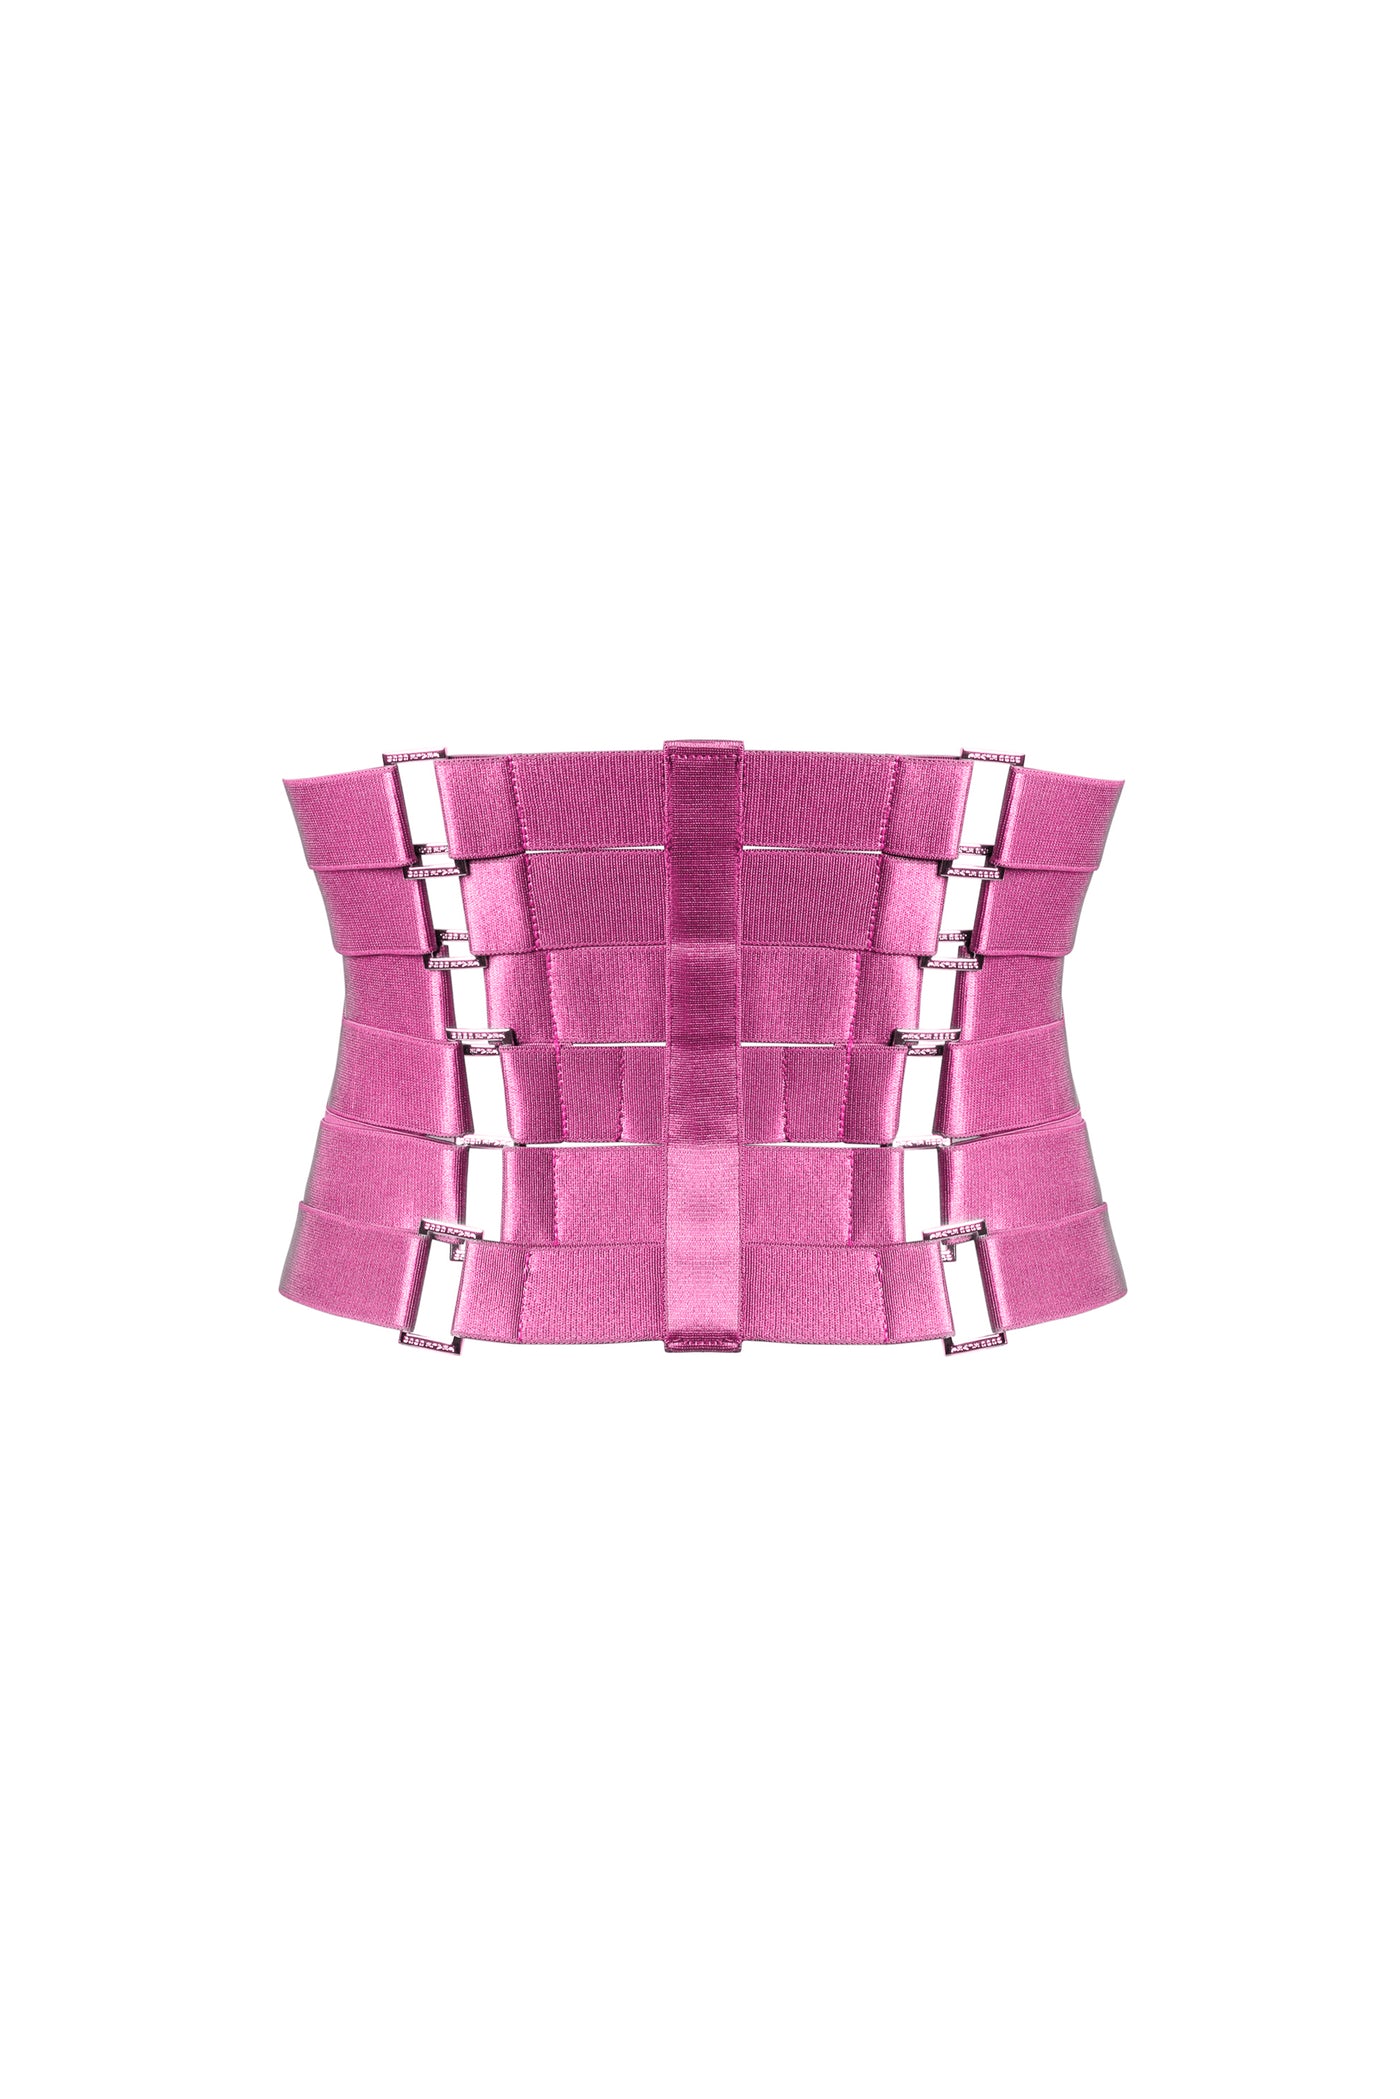 Corset Harness - Candy Pink